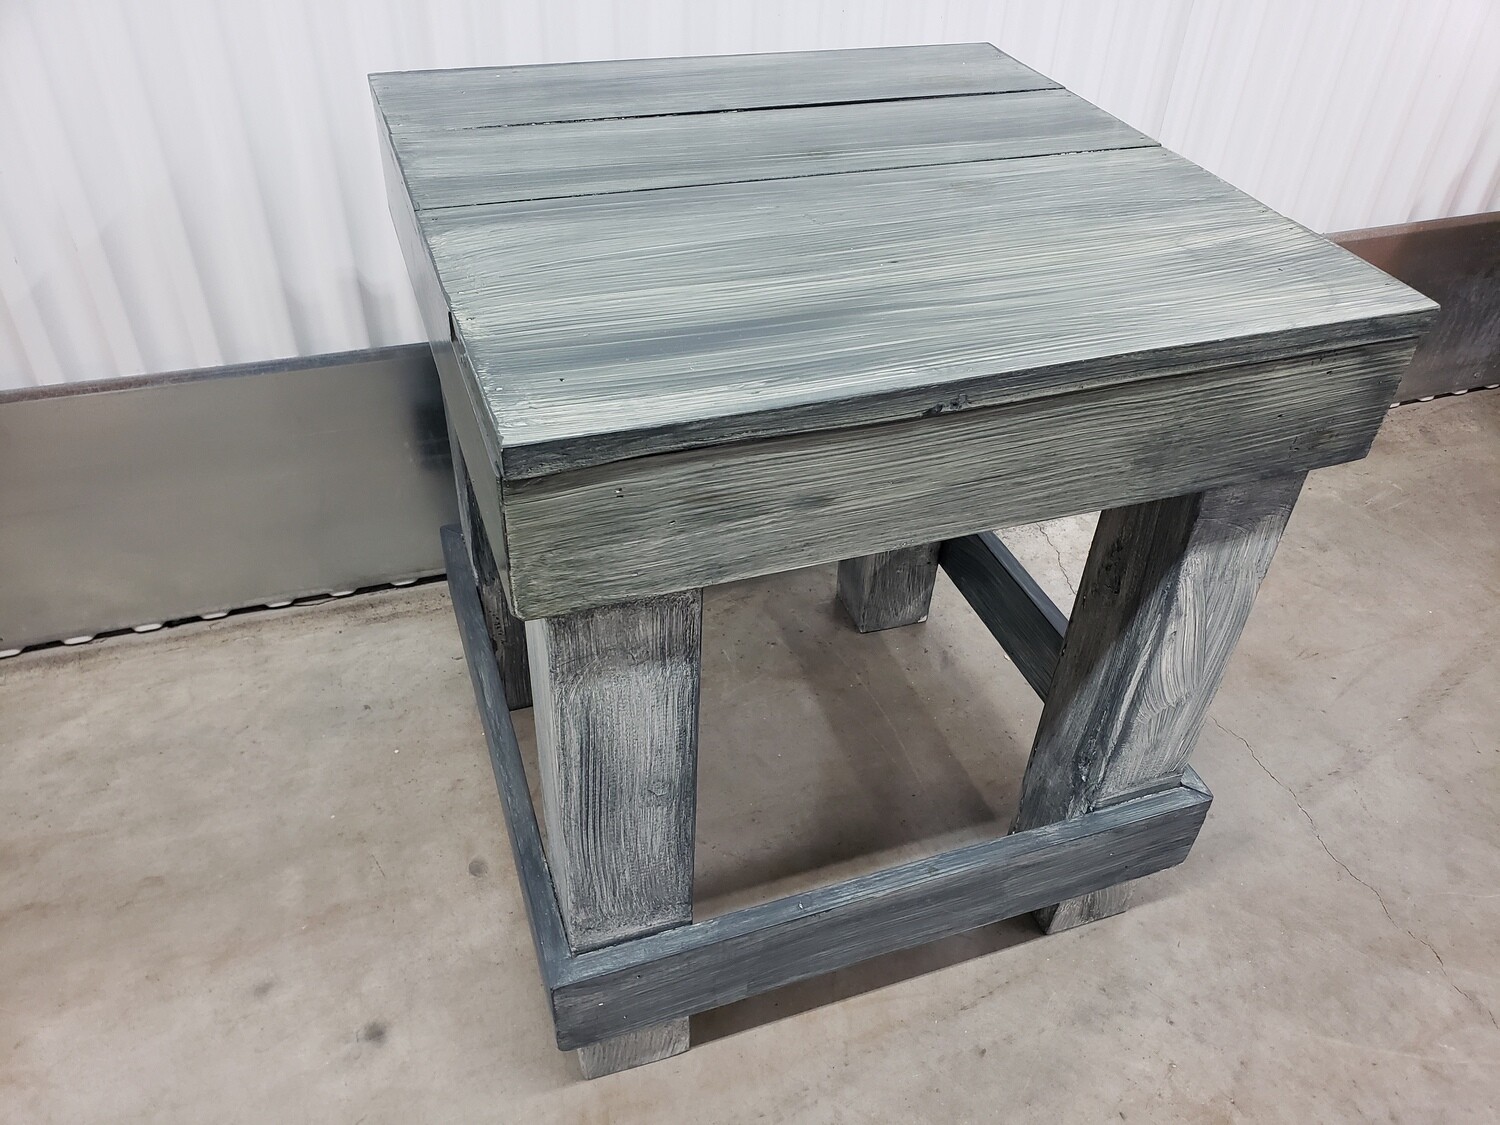 Rustic Pine End Table, gray/green wash #2103